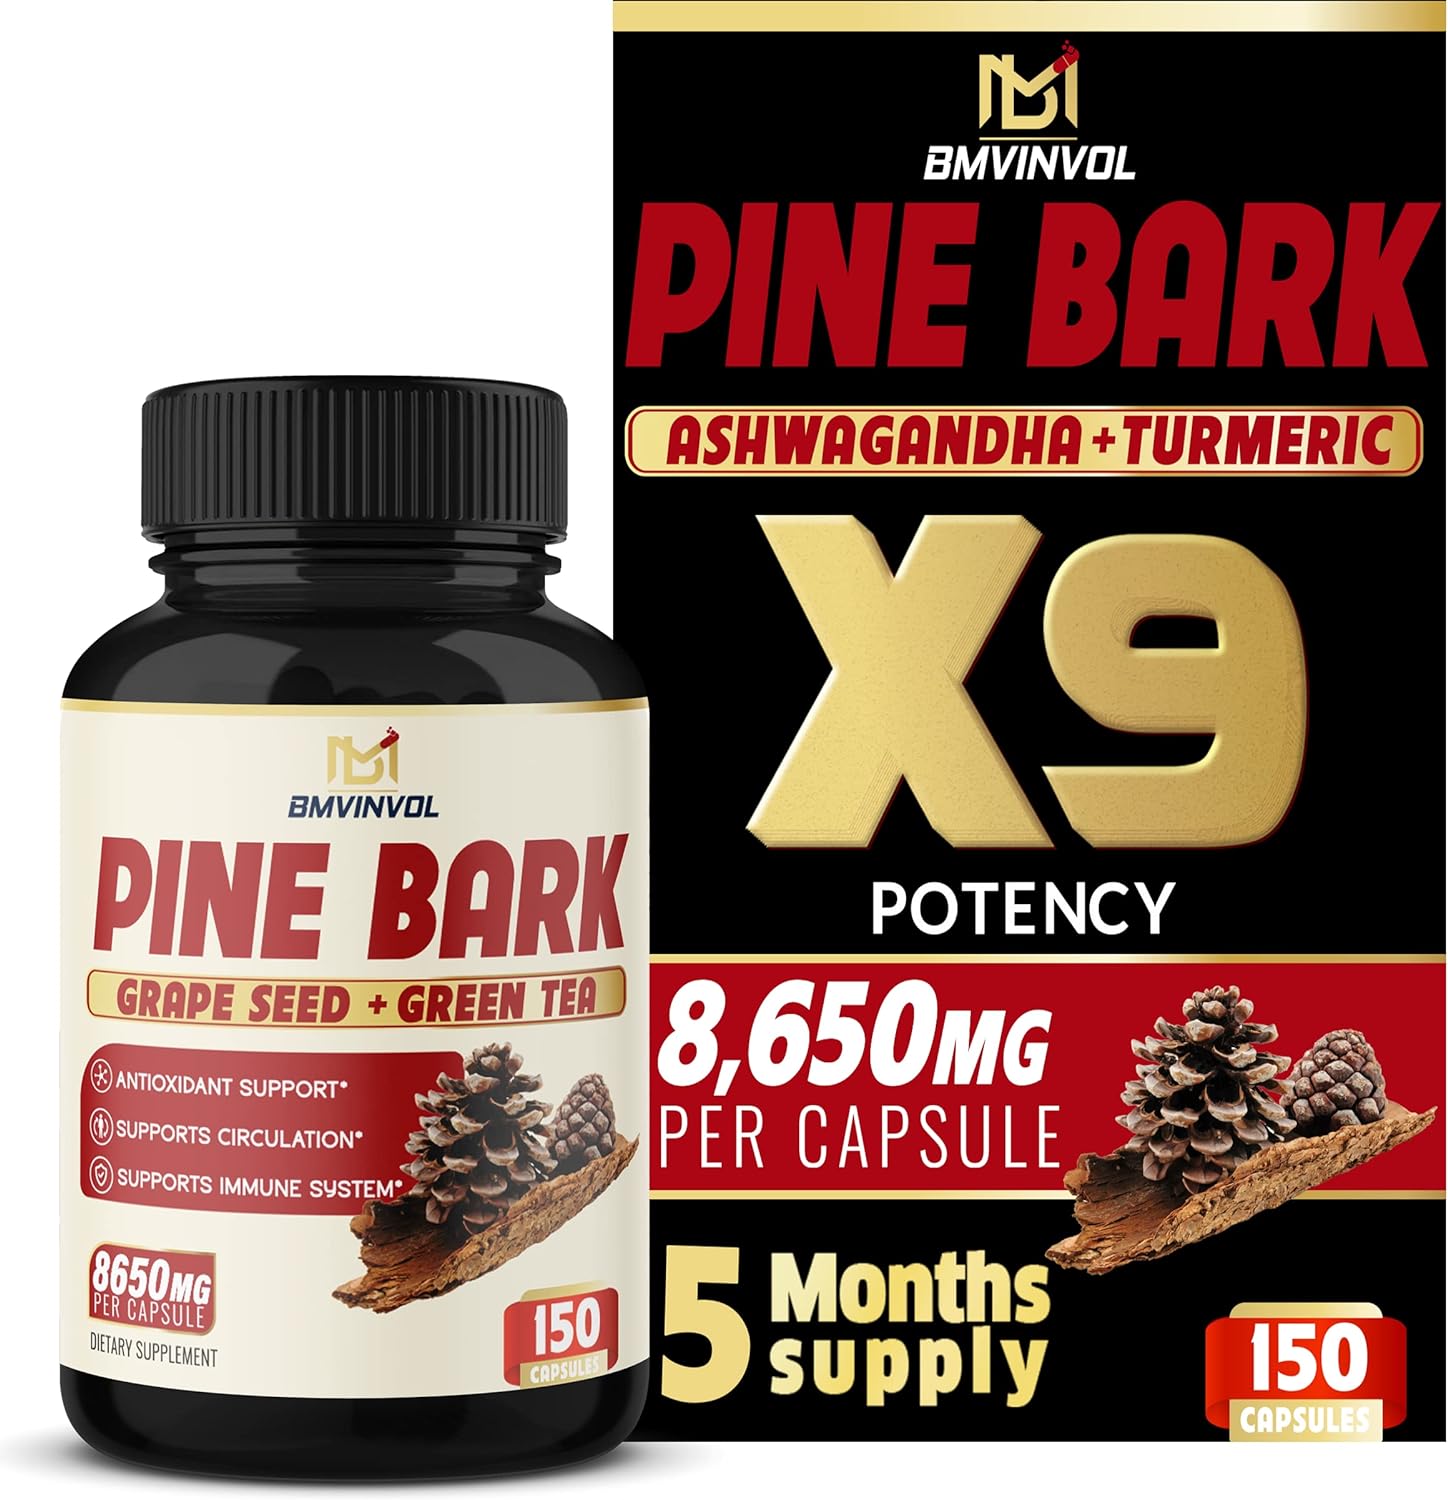 BMVINVOL (5 Months Supply) Pine Bark Extract Capsules 8650 mg - Supports Heart Health, Circulatory Health, Skincare - Ma